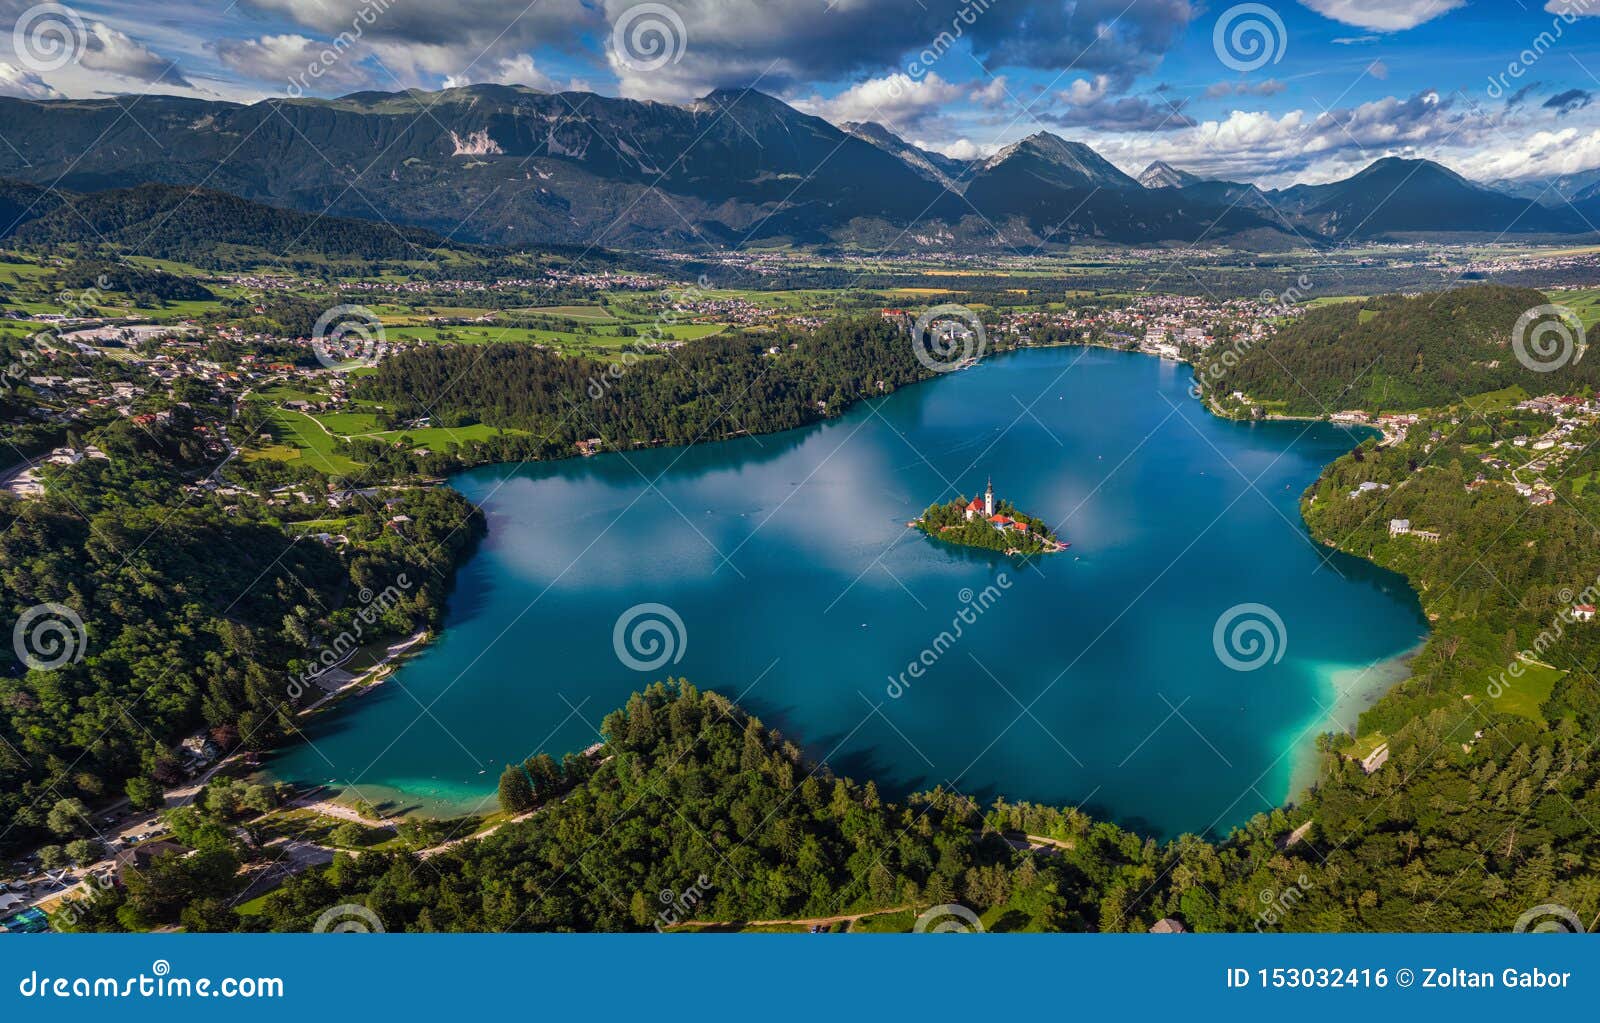 bled, slovenia - aerial panoramic skyline view of lake bled blejsko jezero from high above with the pilgrimage church